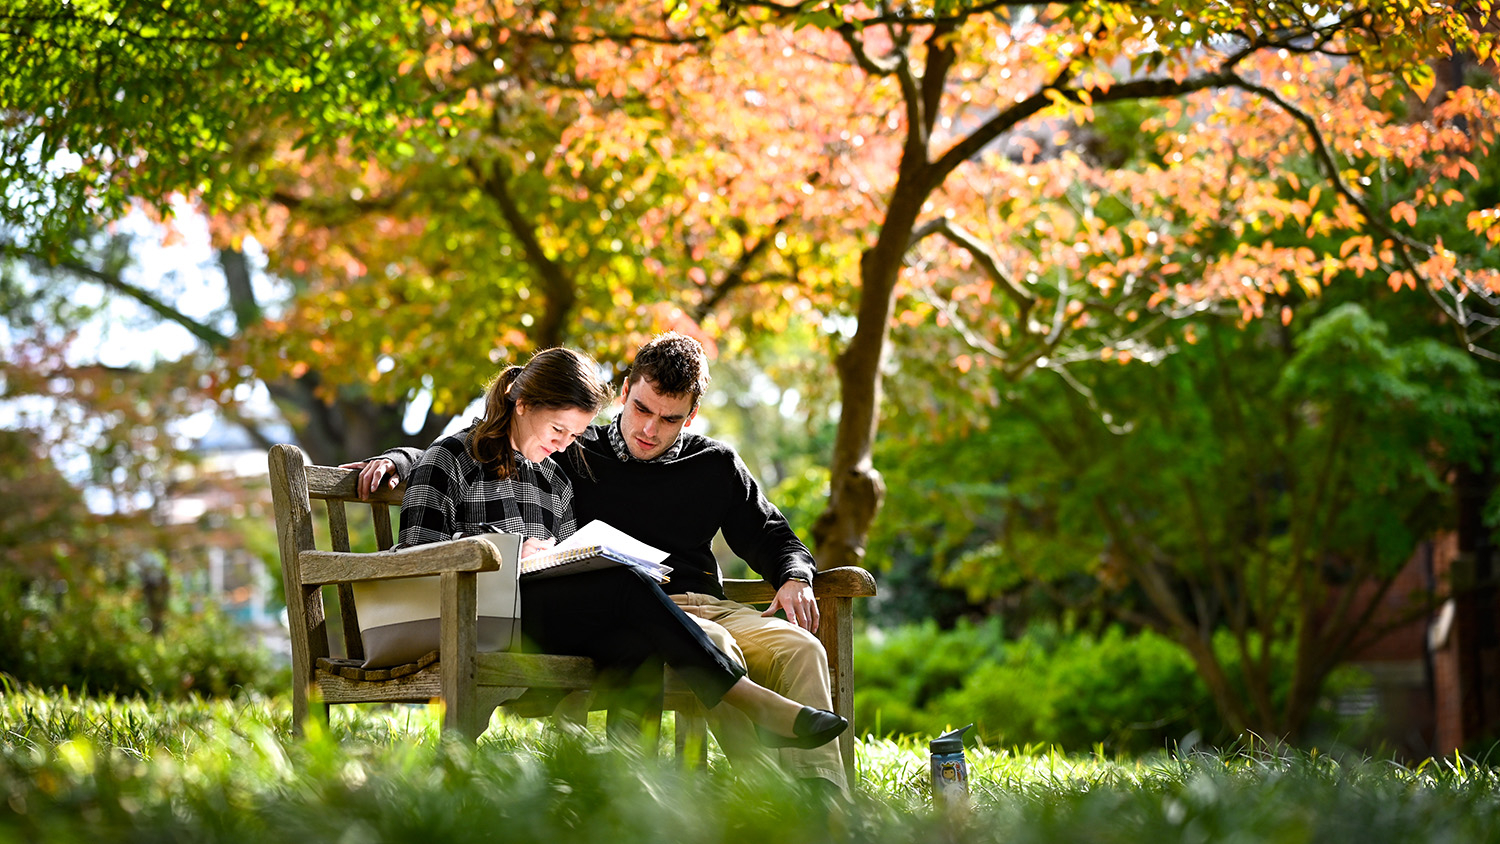 Two people sitting by side on an outdoor bench, looking over a notebook.